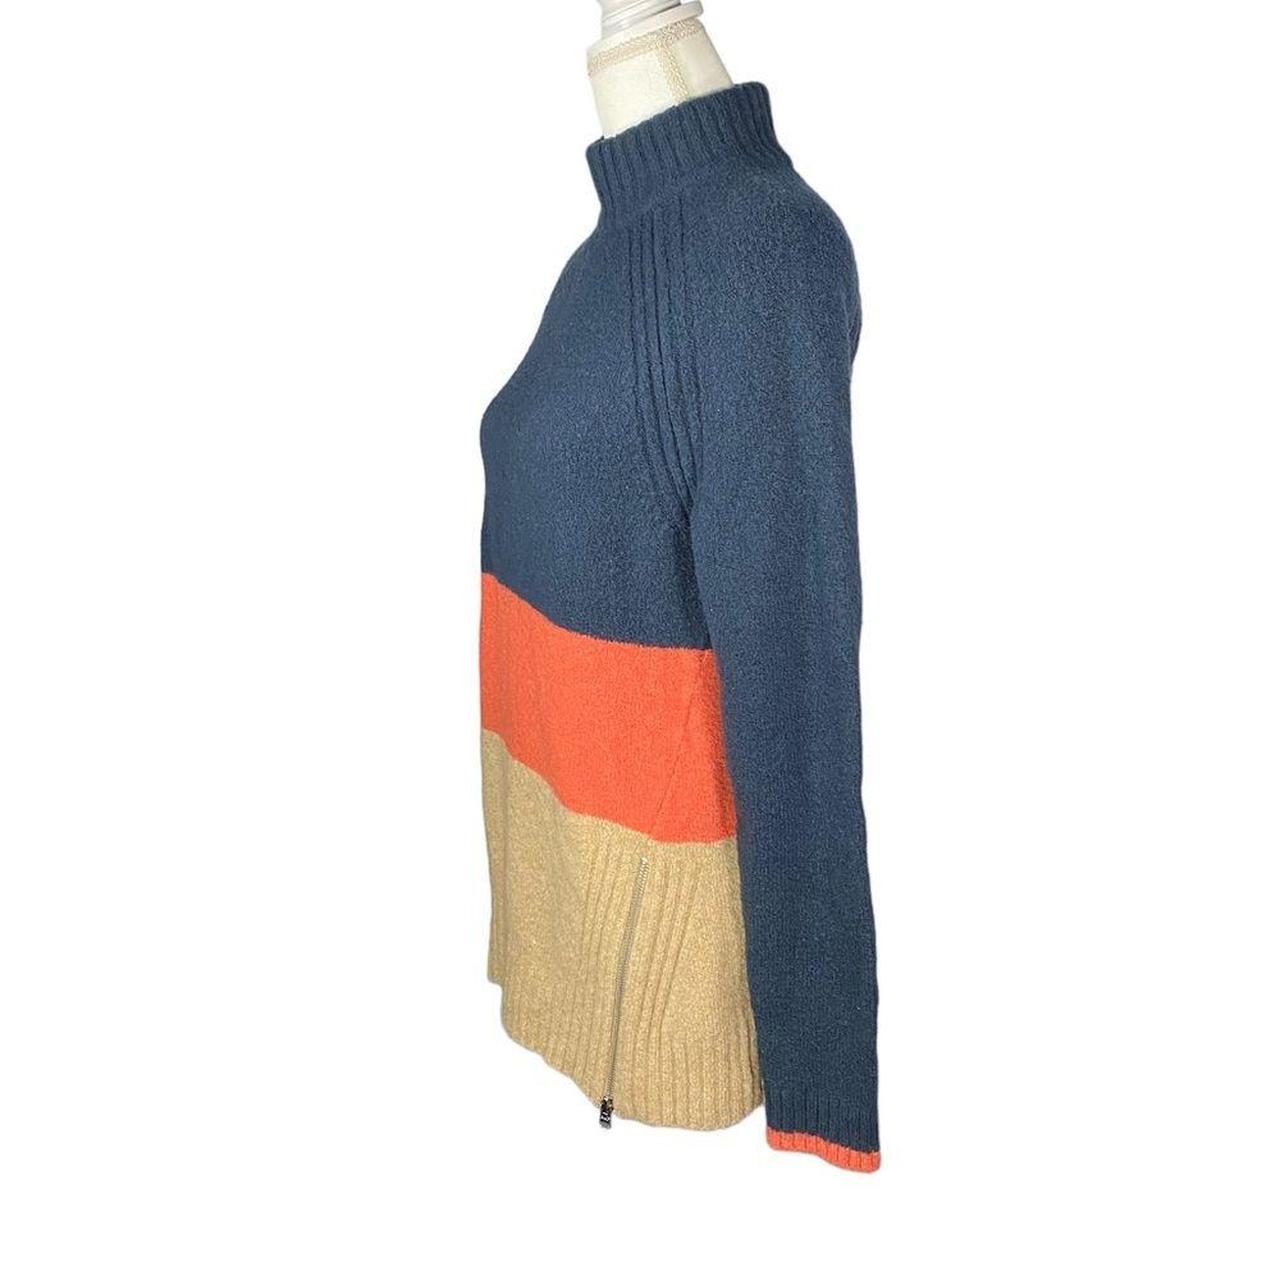 Abercrombie & Fitch Women's Blue and Orange Jumper (4)